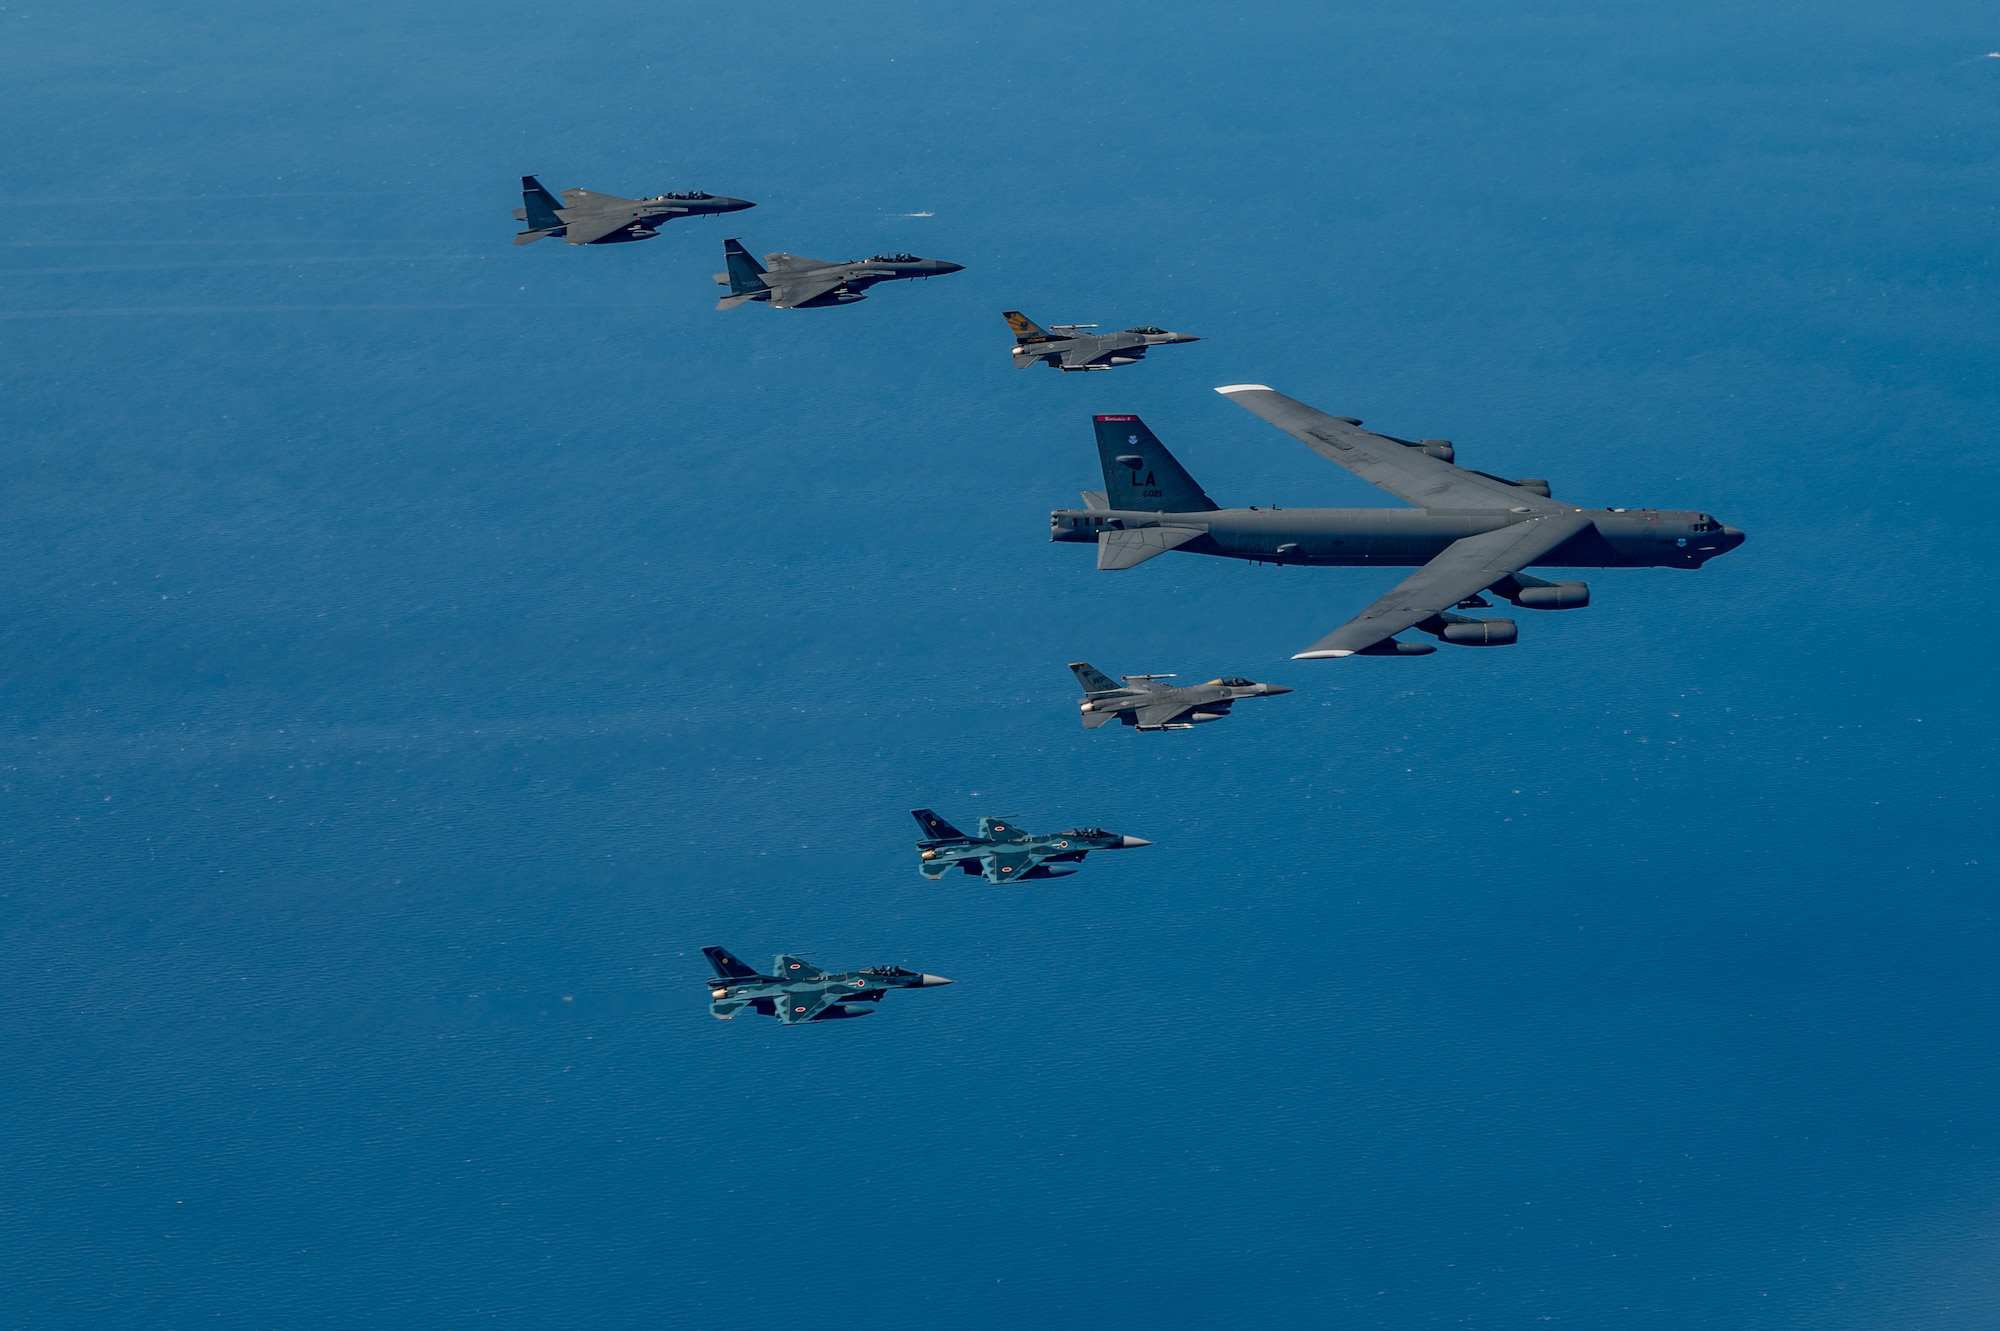 Fighter aircraft from the U.S., Japan, and the Republic of Korea conducted a trilateral escort flight of a U.S. B-52H Stratofortress Bomber operating in the Indo-Pacific, 22 Oct, 2023. U.S. F-16s from the 80th Fighter Squadron, 8th Fighter Wing flew alongside Japan Air Self-Defense Force (JASDF) F-2s from the 8th Air Wing, and Republic of Korea Air Force (ROKAF) F-15Ks from the 11th Wing. (U.S. Air Force photo by Senior Airman Karla Parra)